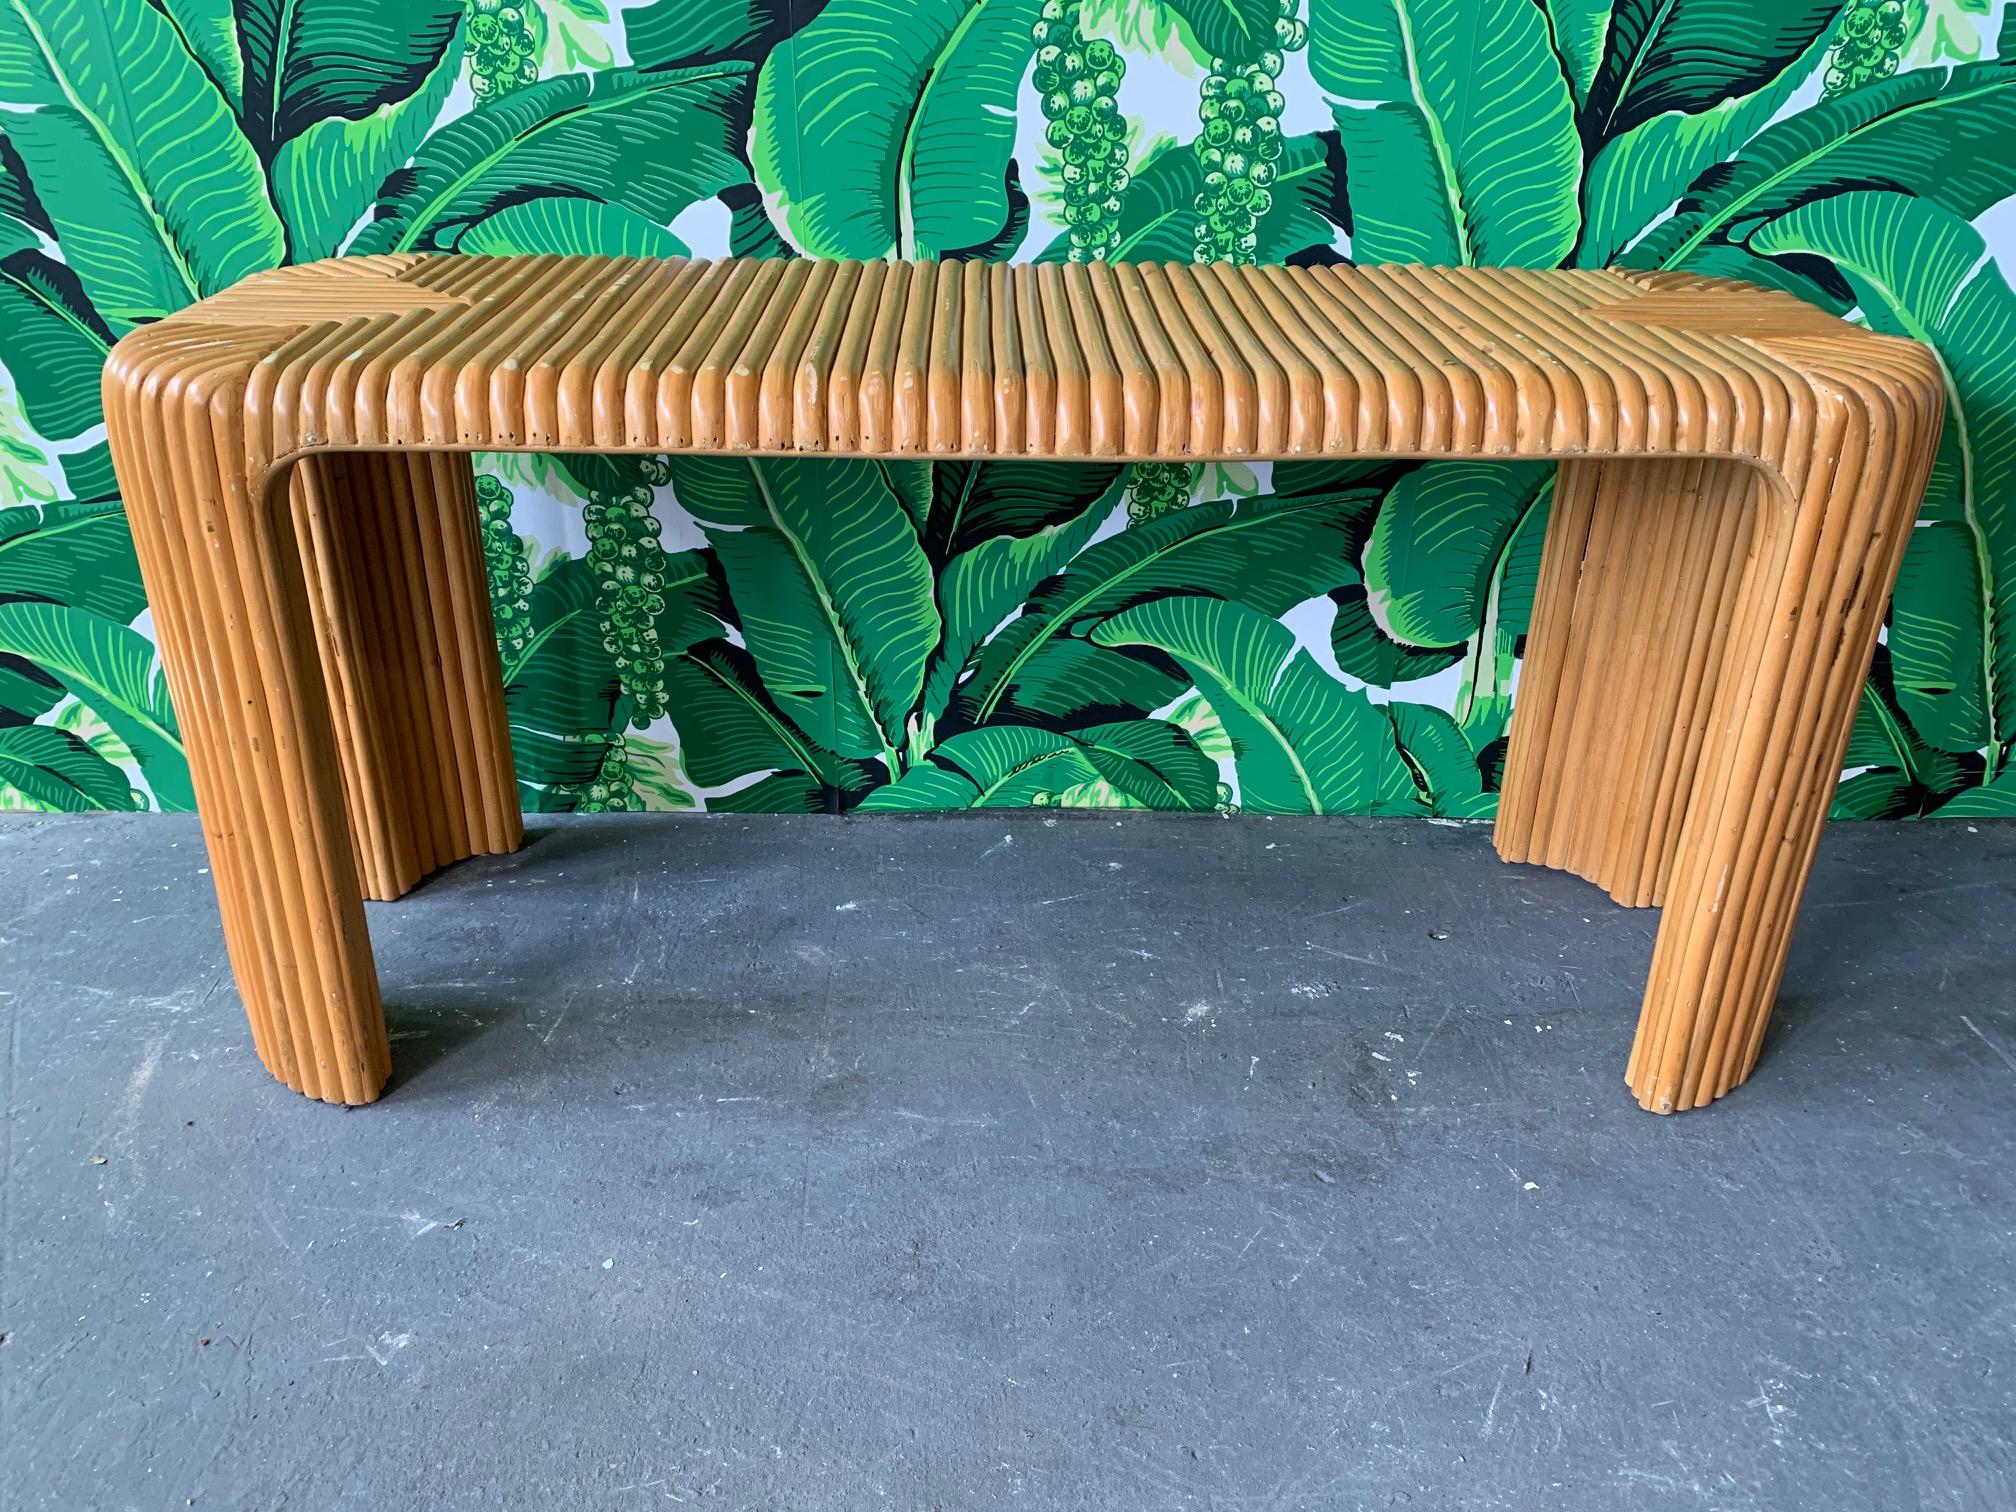 Vintage console or sofa table features split reed bamboo veneer in a distinctive geometric pattern. Good vintage condition with minor abrasions consistent with age. Made in Indonesia.